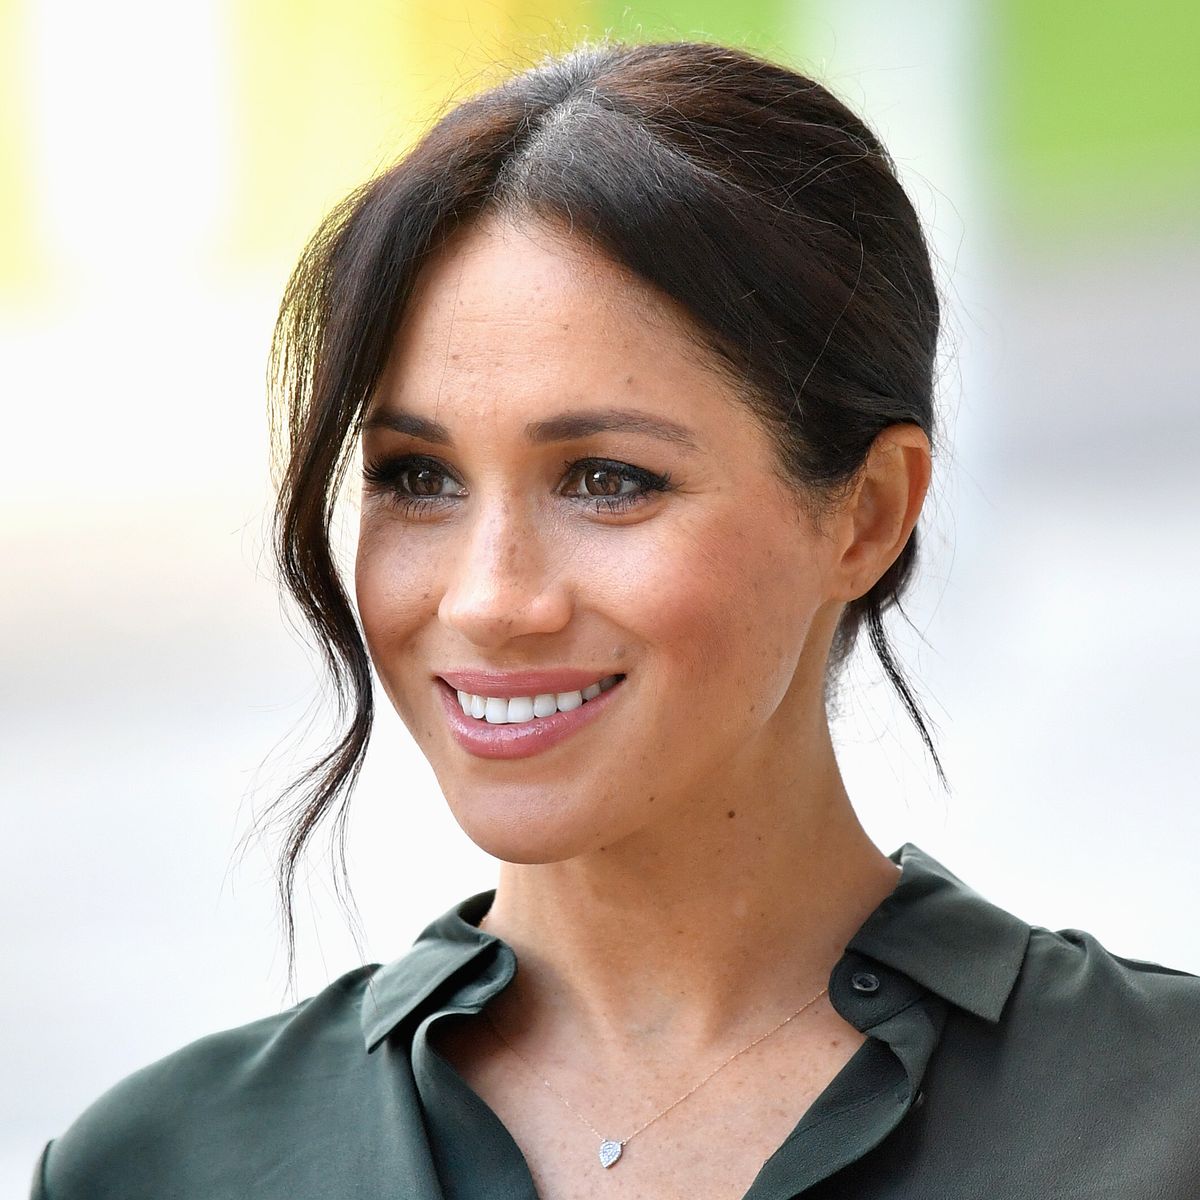 The Duke and Duchess Of Sussex Visit Sussex